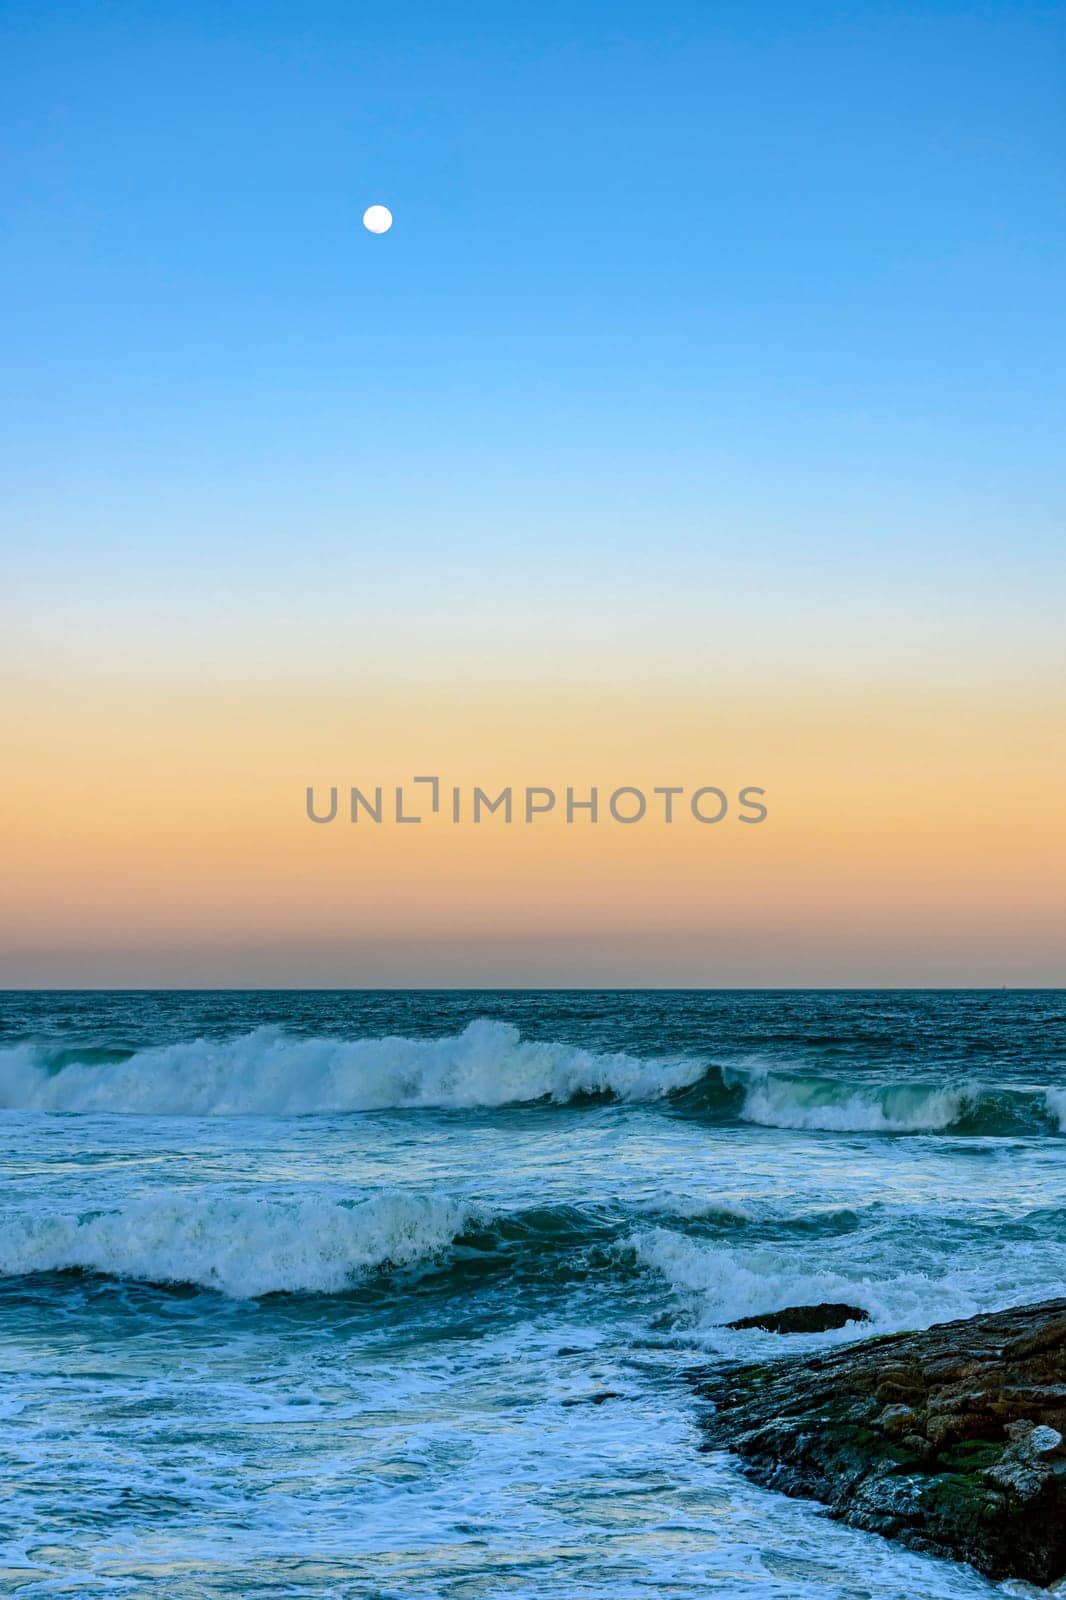 Moon over the sea and waves during sunset at Ipanema beach in Rio de Janeiro, Brazil